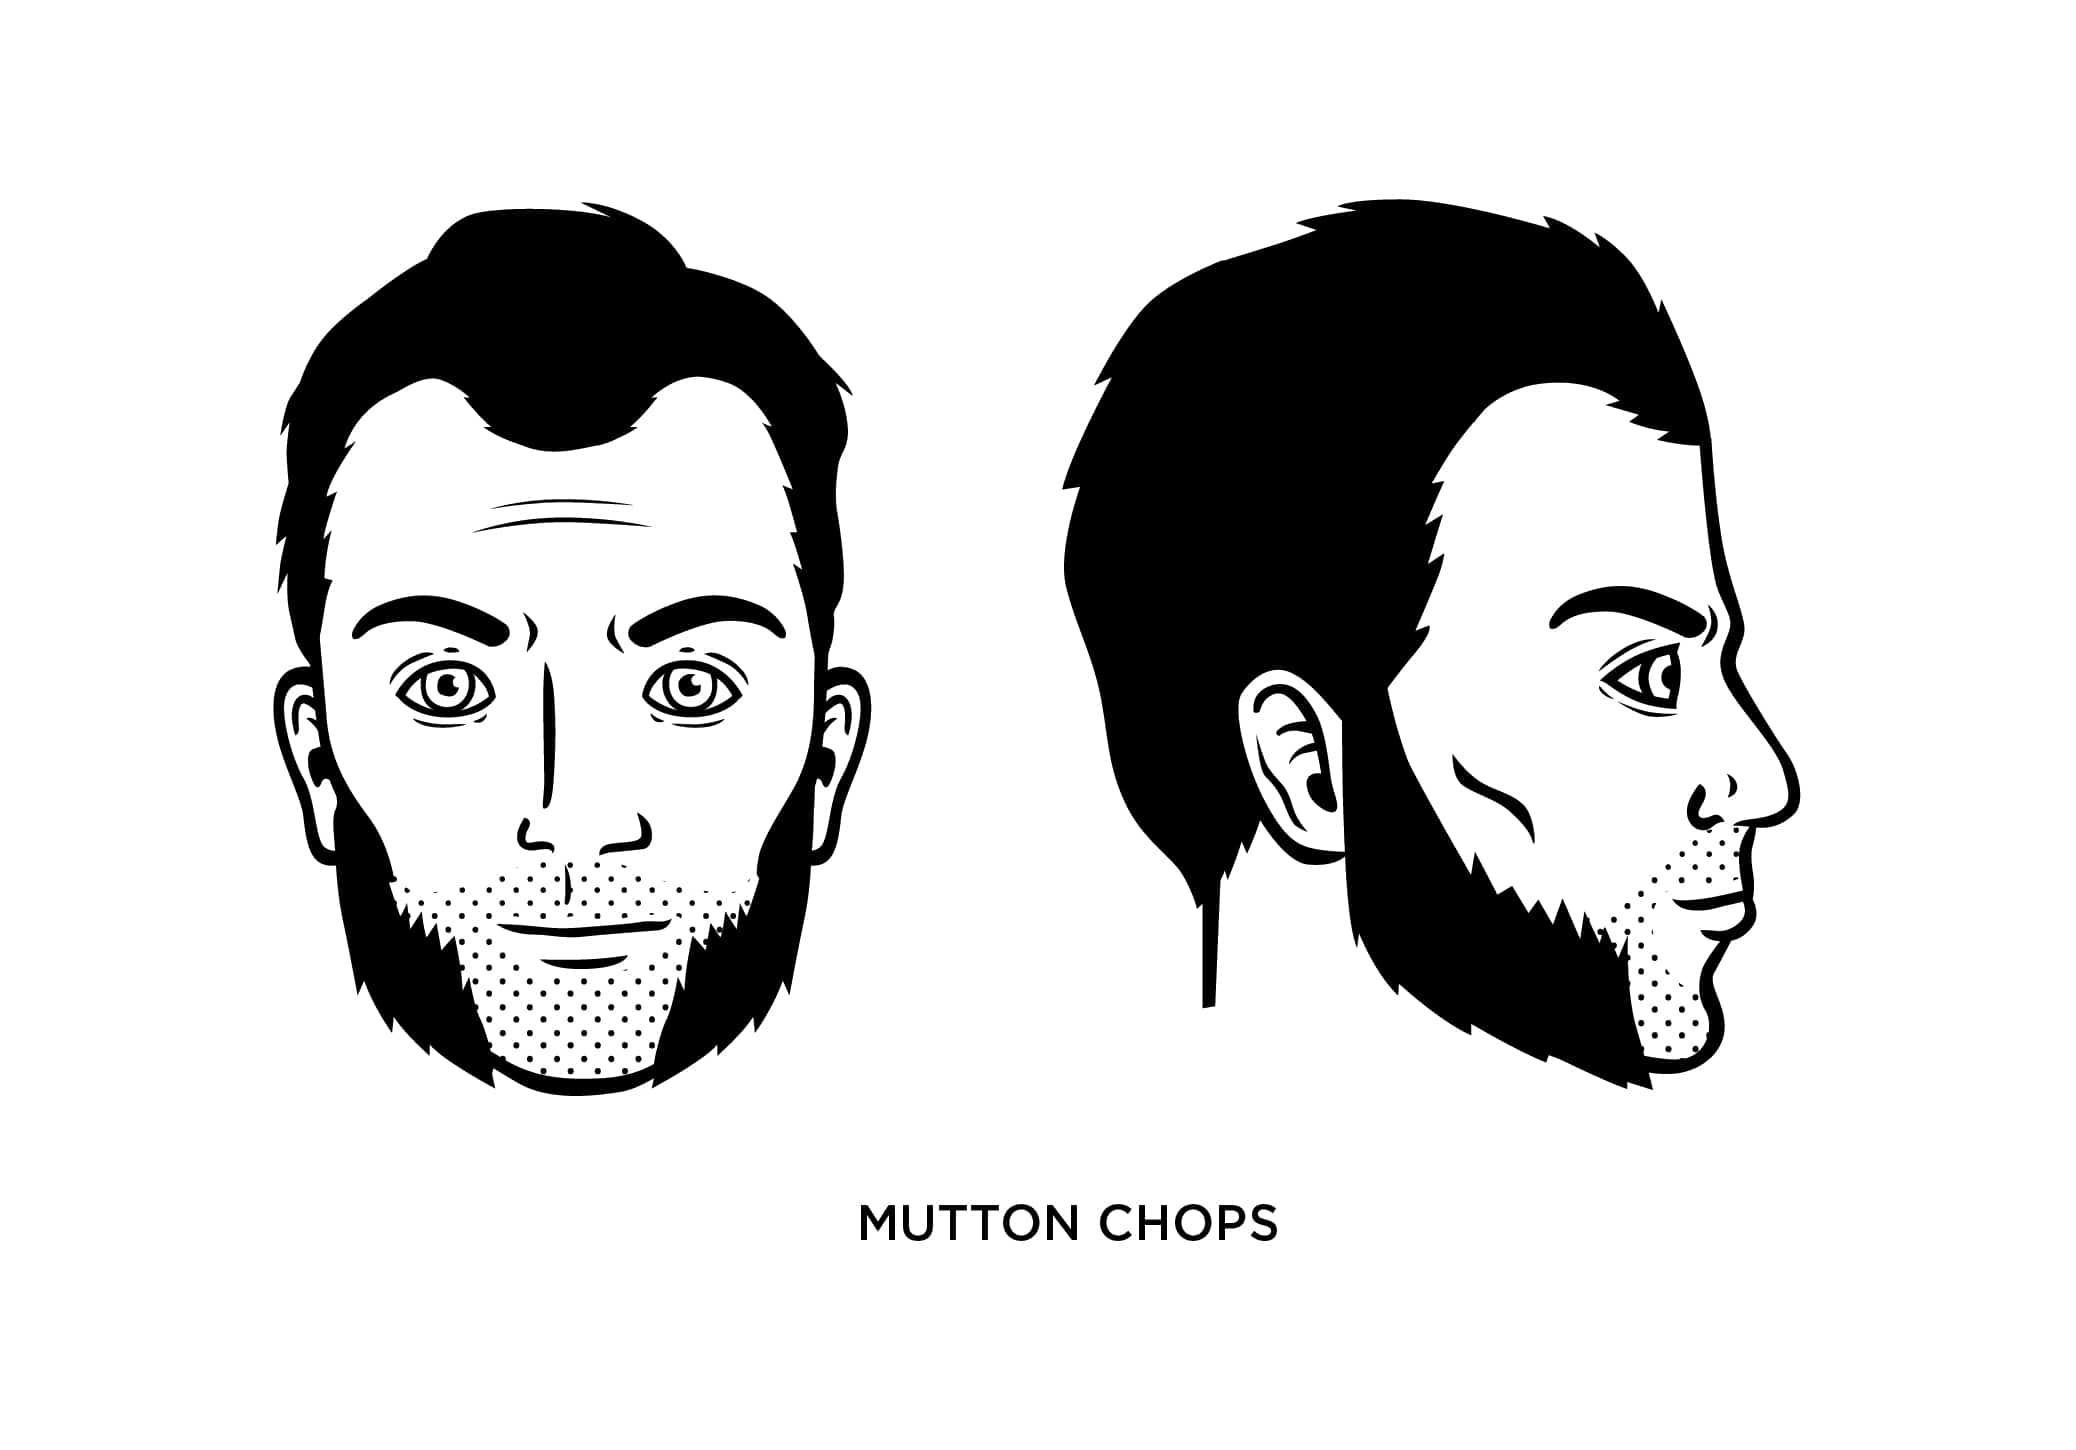 The Mutton chops style